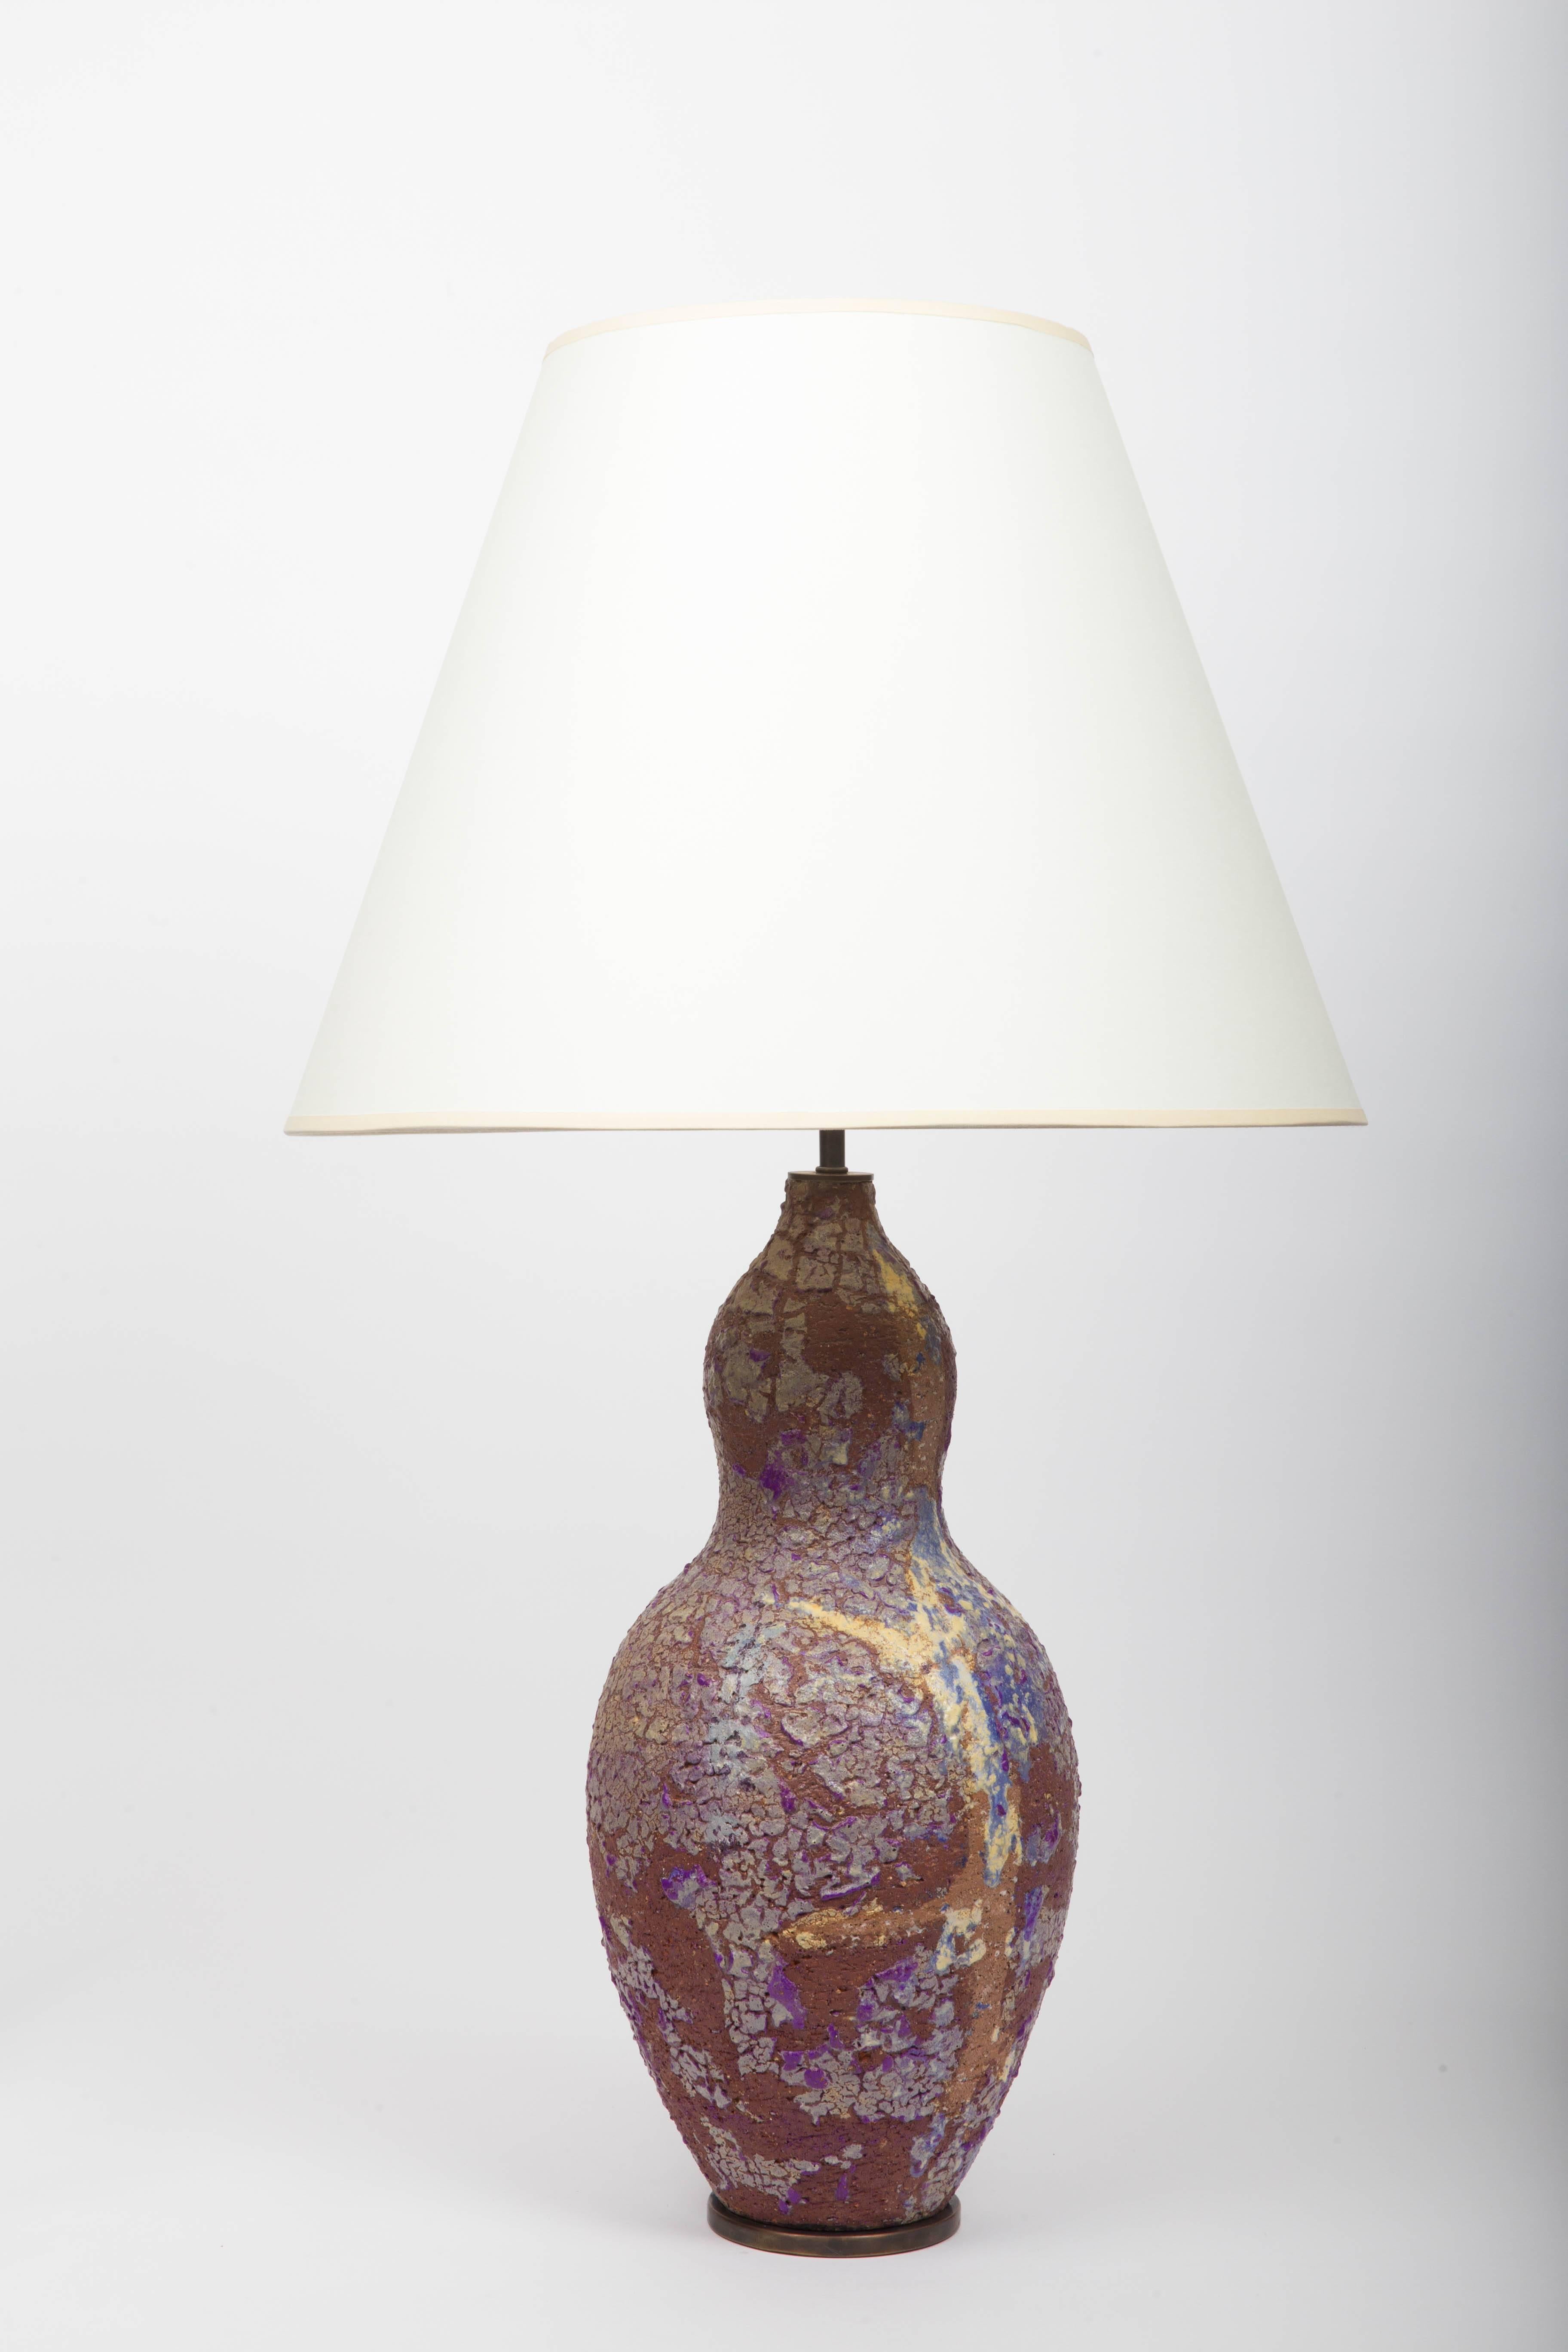 Stoneware table lamp with crackle glazed and a bronze base,
by Marcello Fantoni, Italy, 1950s.

 